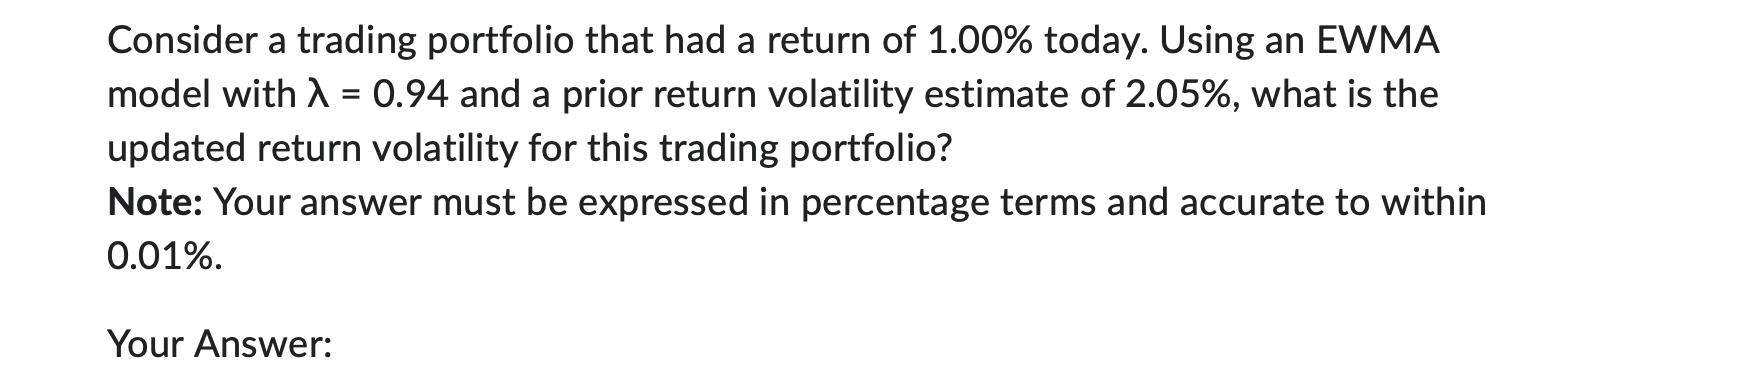 Consider a trading portfolio that had a return of ( 1.00 % ) today. Using an EWMA model with ( lambda=0.94 ) and a prio